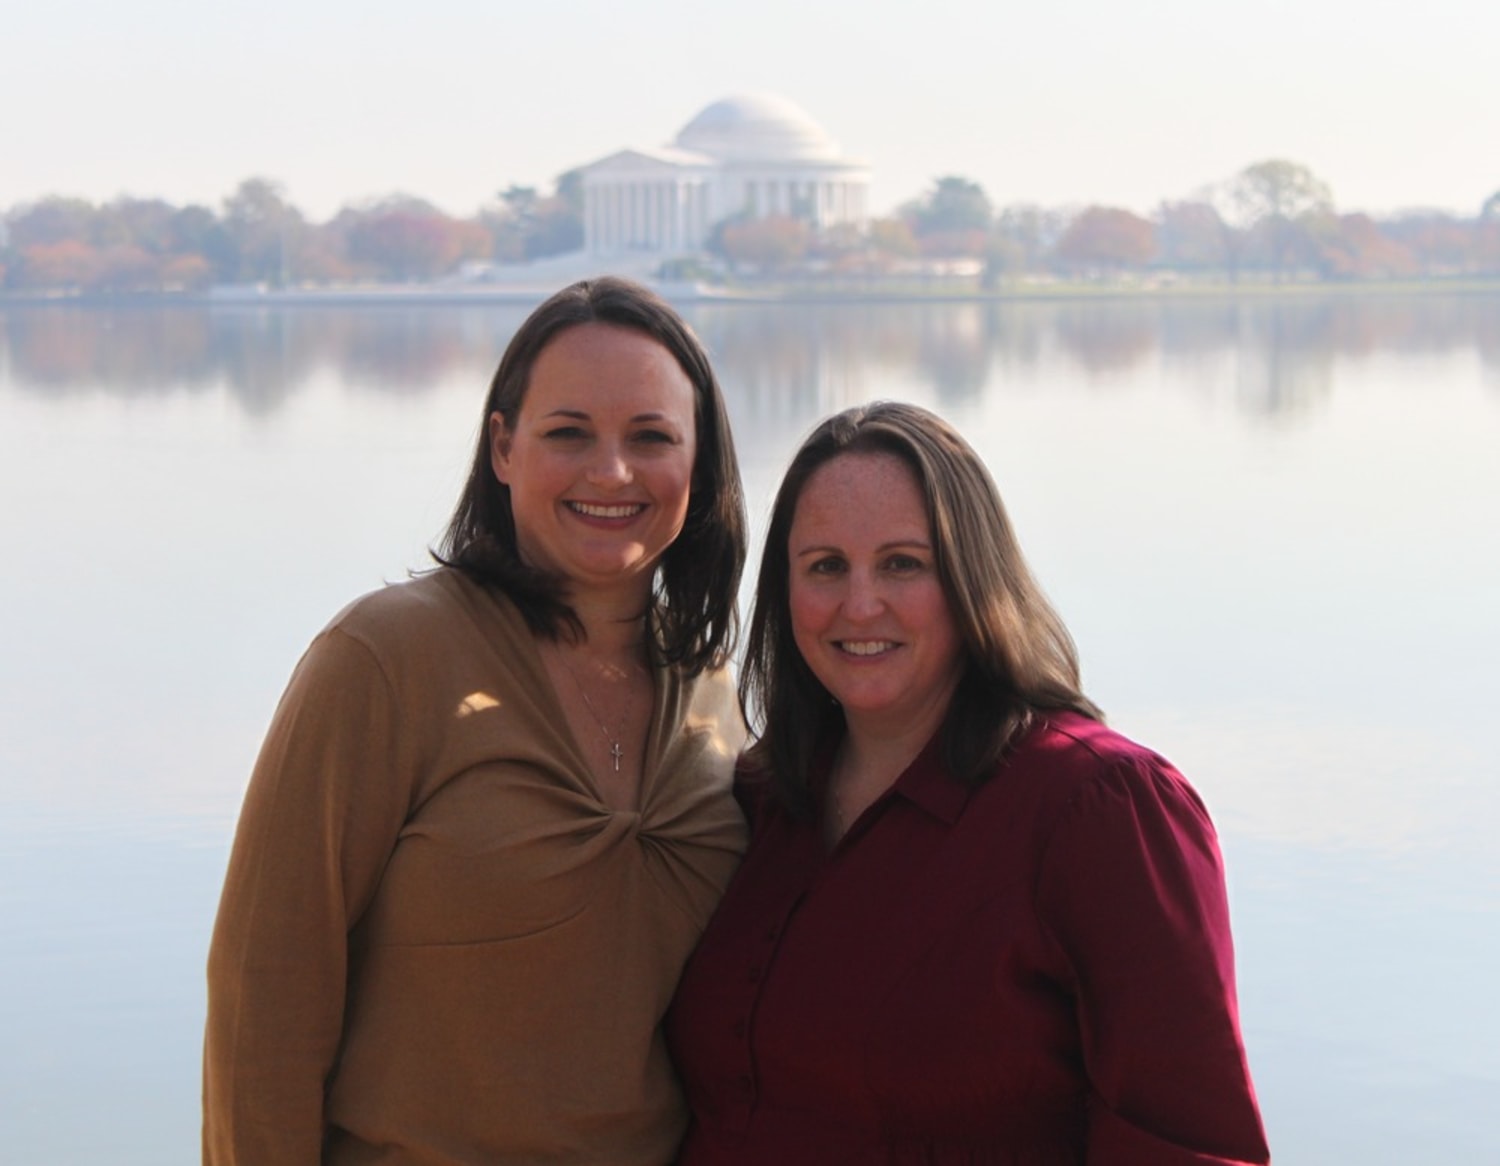 Pentagon opts not to intervene in ban of lesbian by Fort Bragg spouses club pic